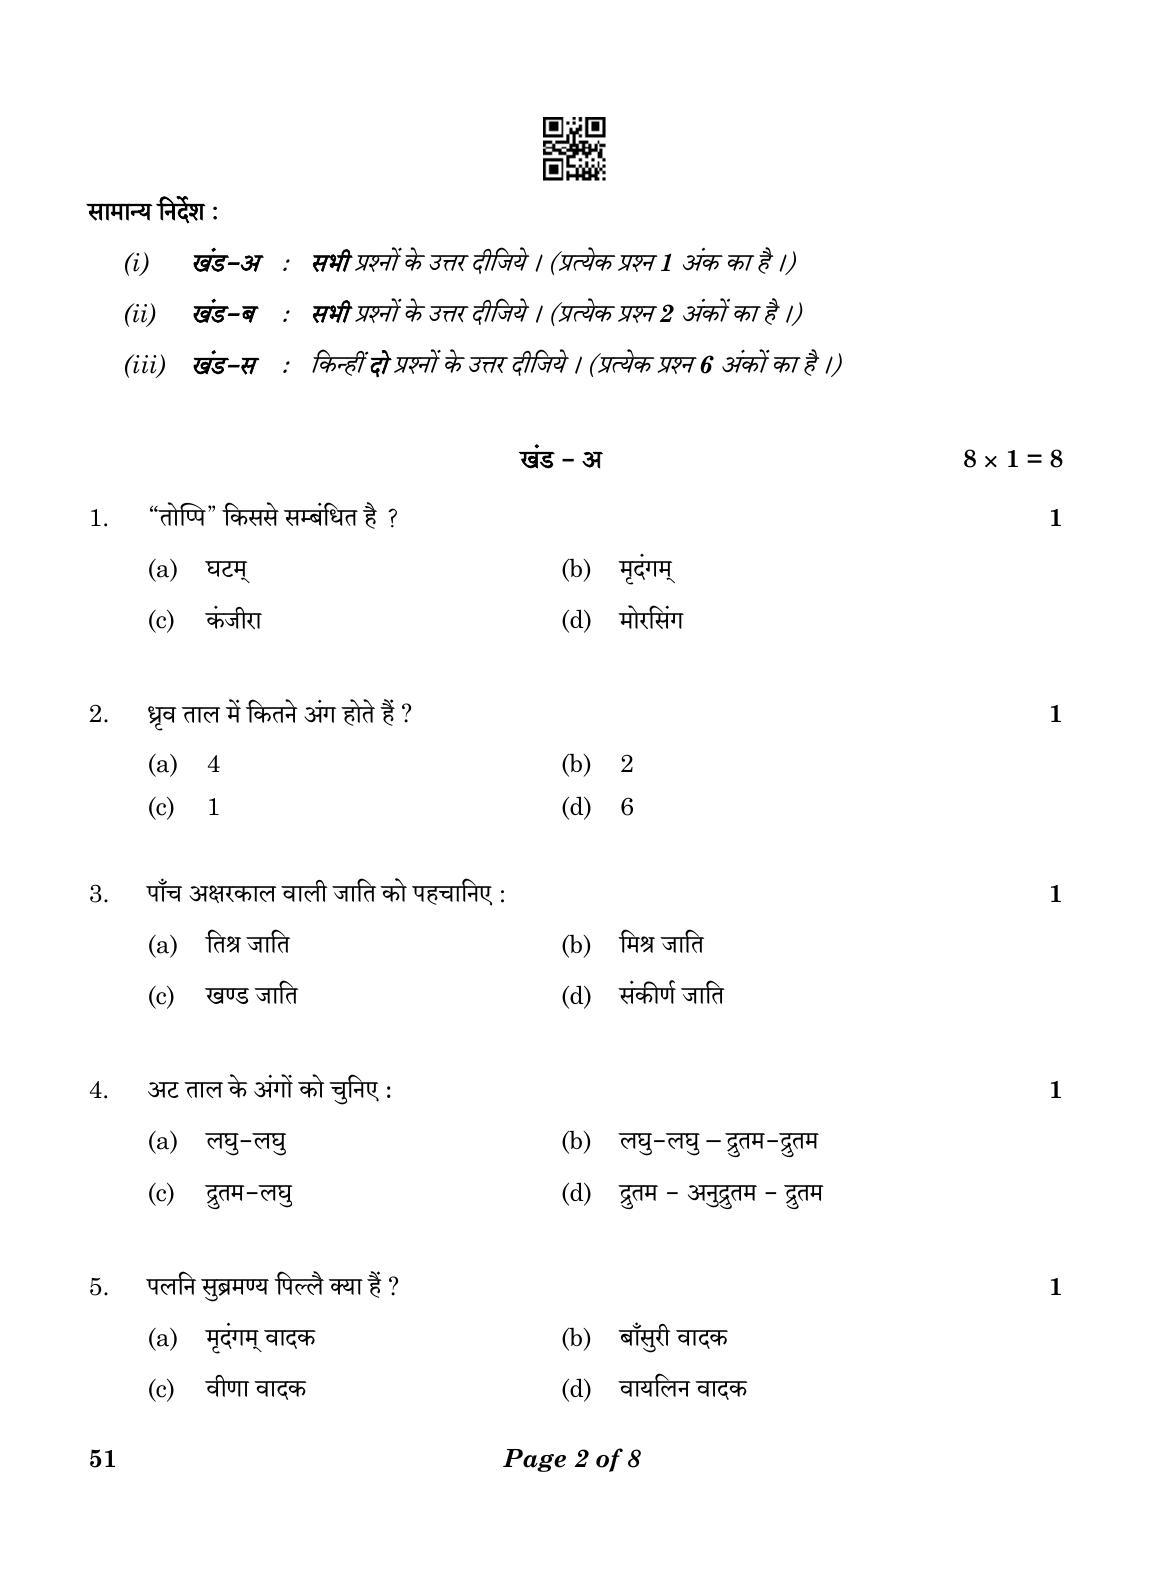 CBSE Class 10 51 CARNATIC MUSIC (Percussion Instruments) 2023 Question Paper - Page 2